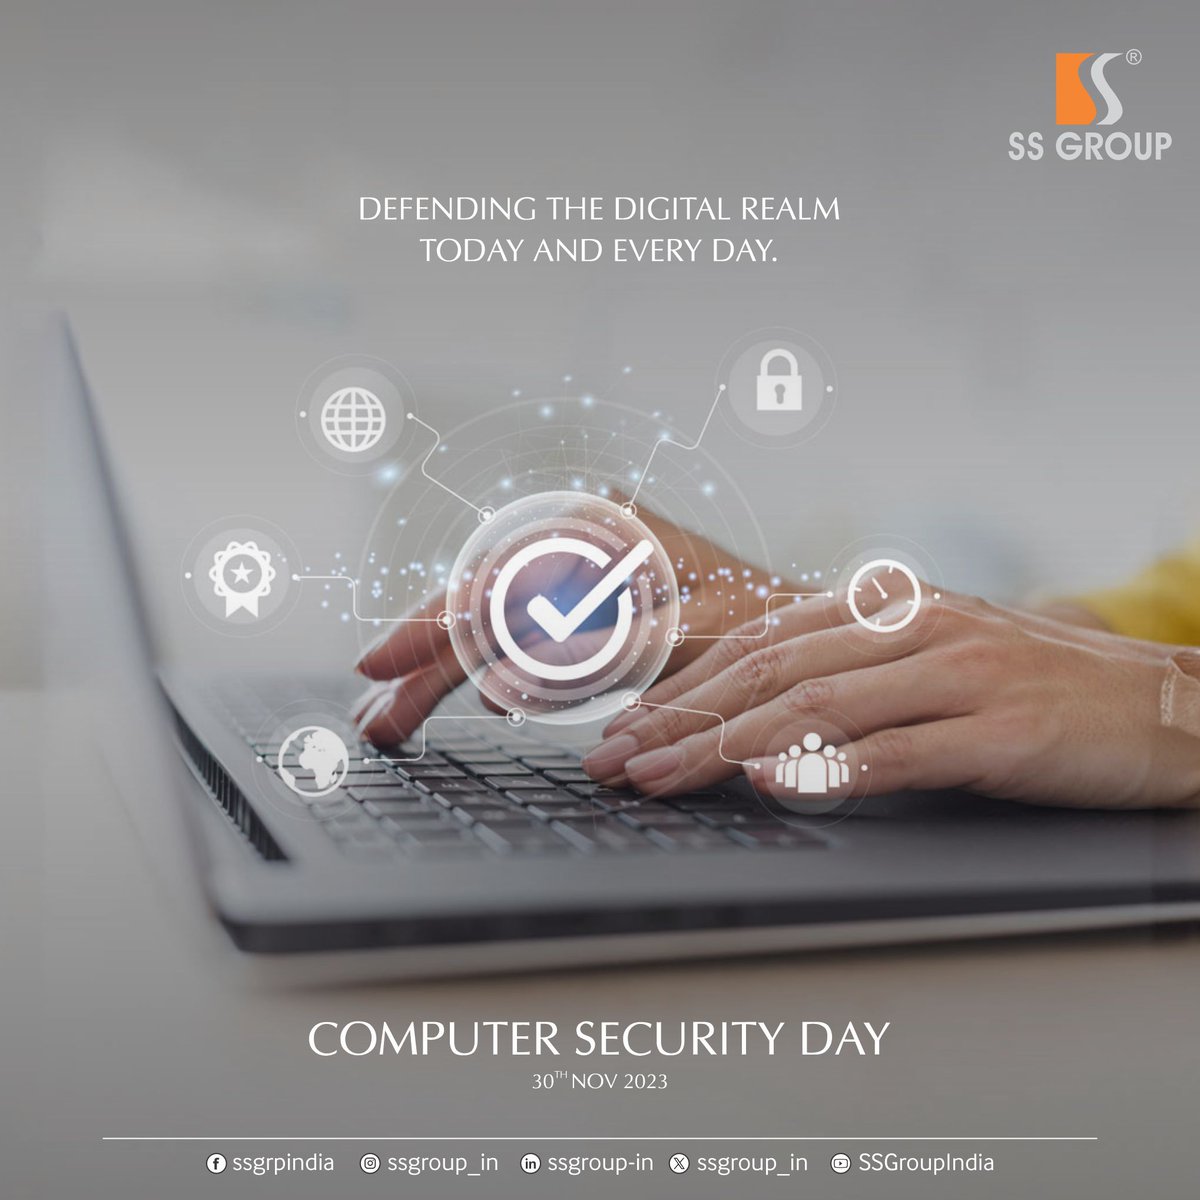 DEFENDING THE DIGITAL REALM TODAY AND EVERY DAY.
COMPUTER SECURITY DAY

#SSGroup #ComputerSecurityDay #SecureYourWorld #CyberResilience #SecurityFirst #OnlineSafety